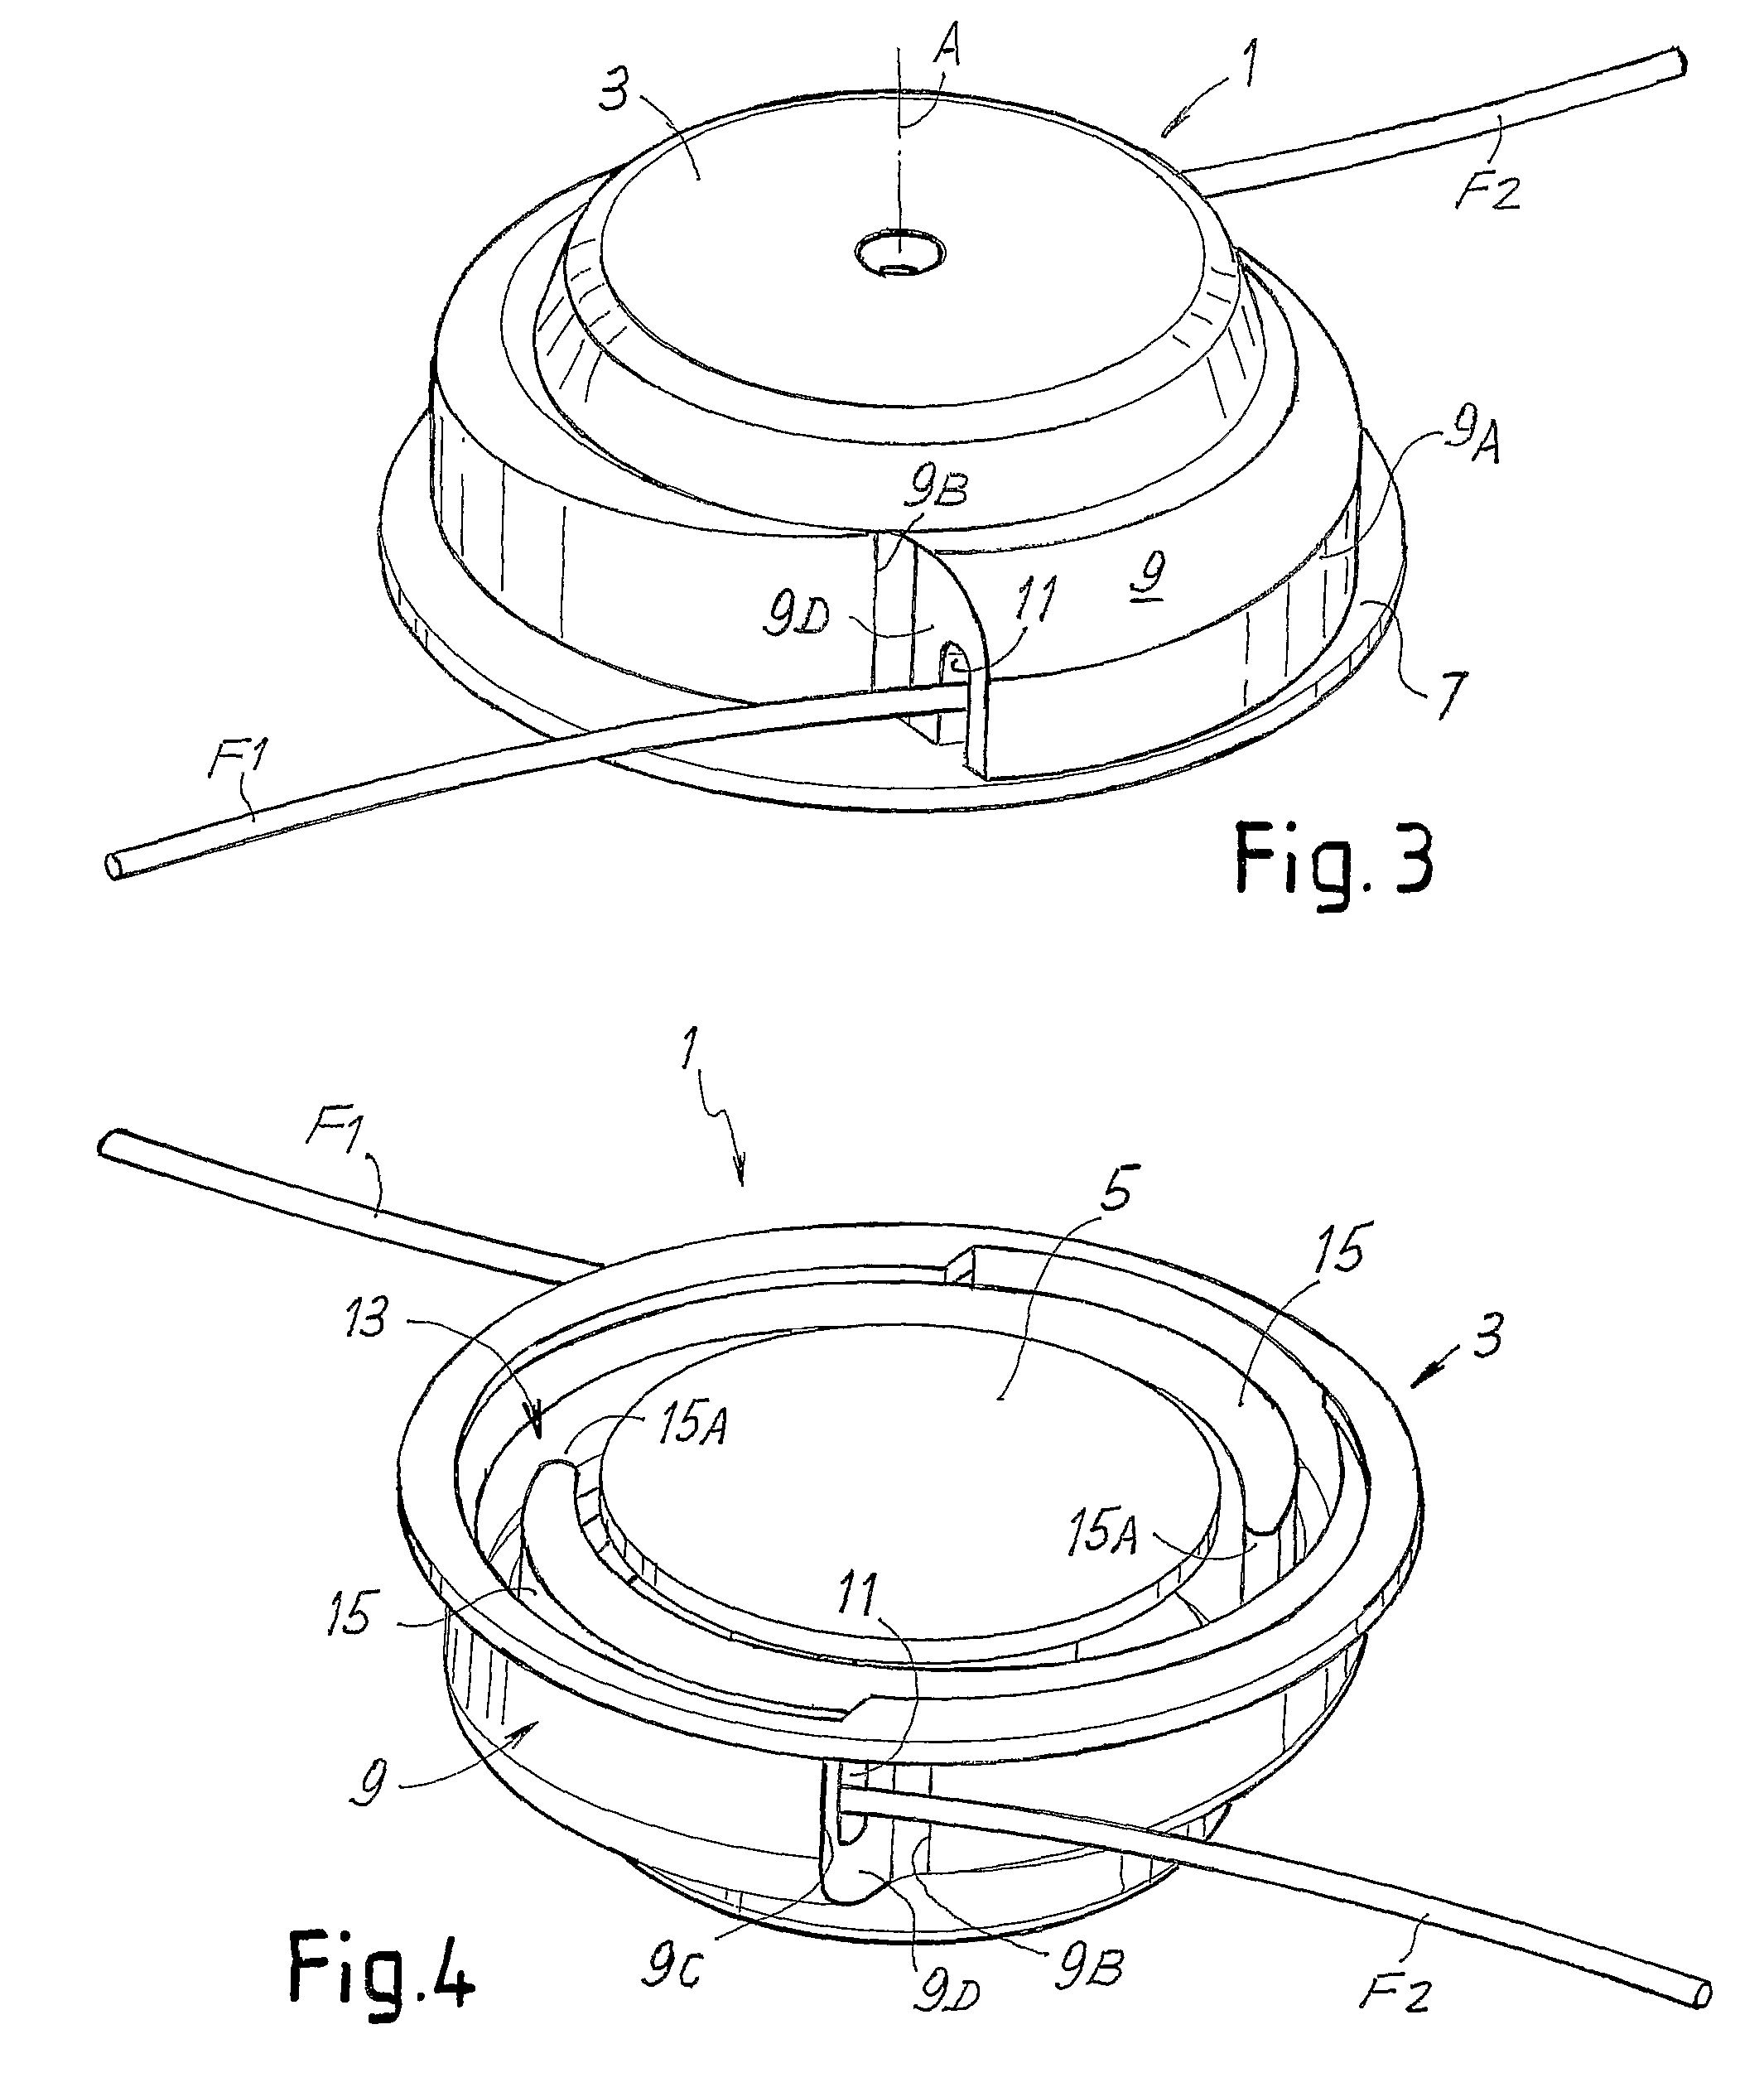 Grass-cutting head with spiral guide channels for the cutting line